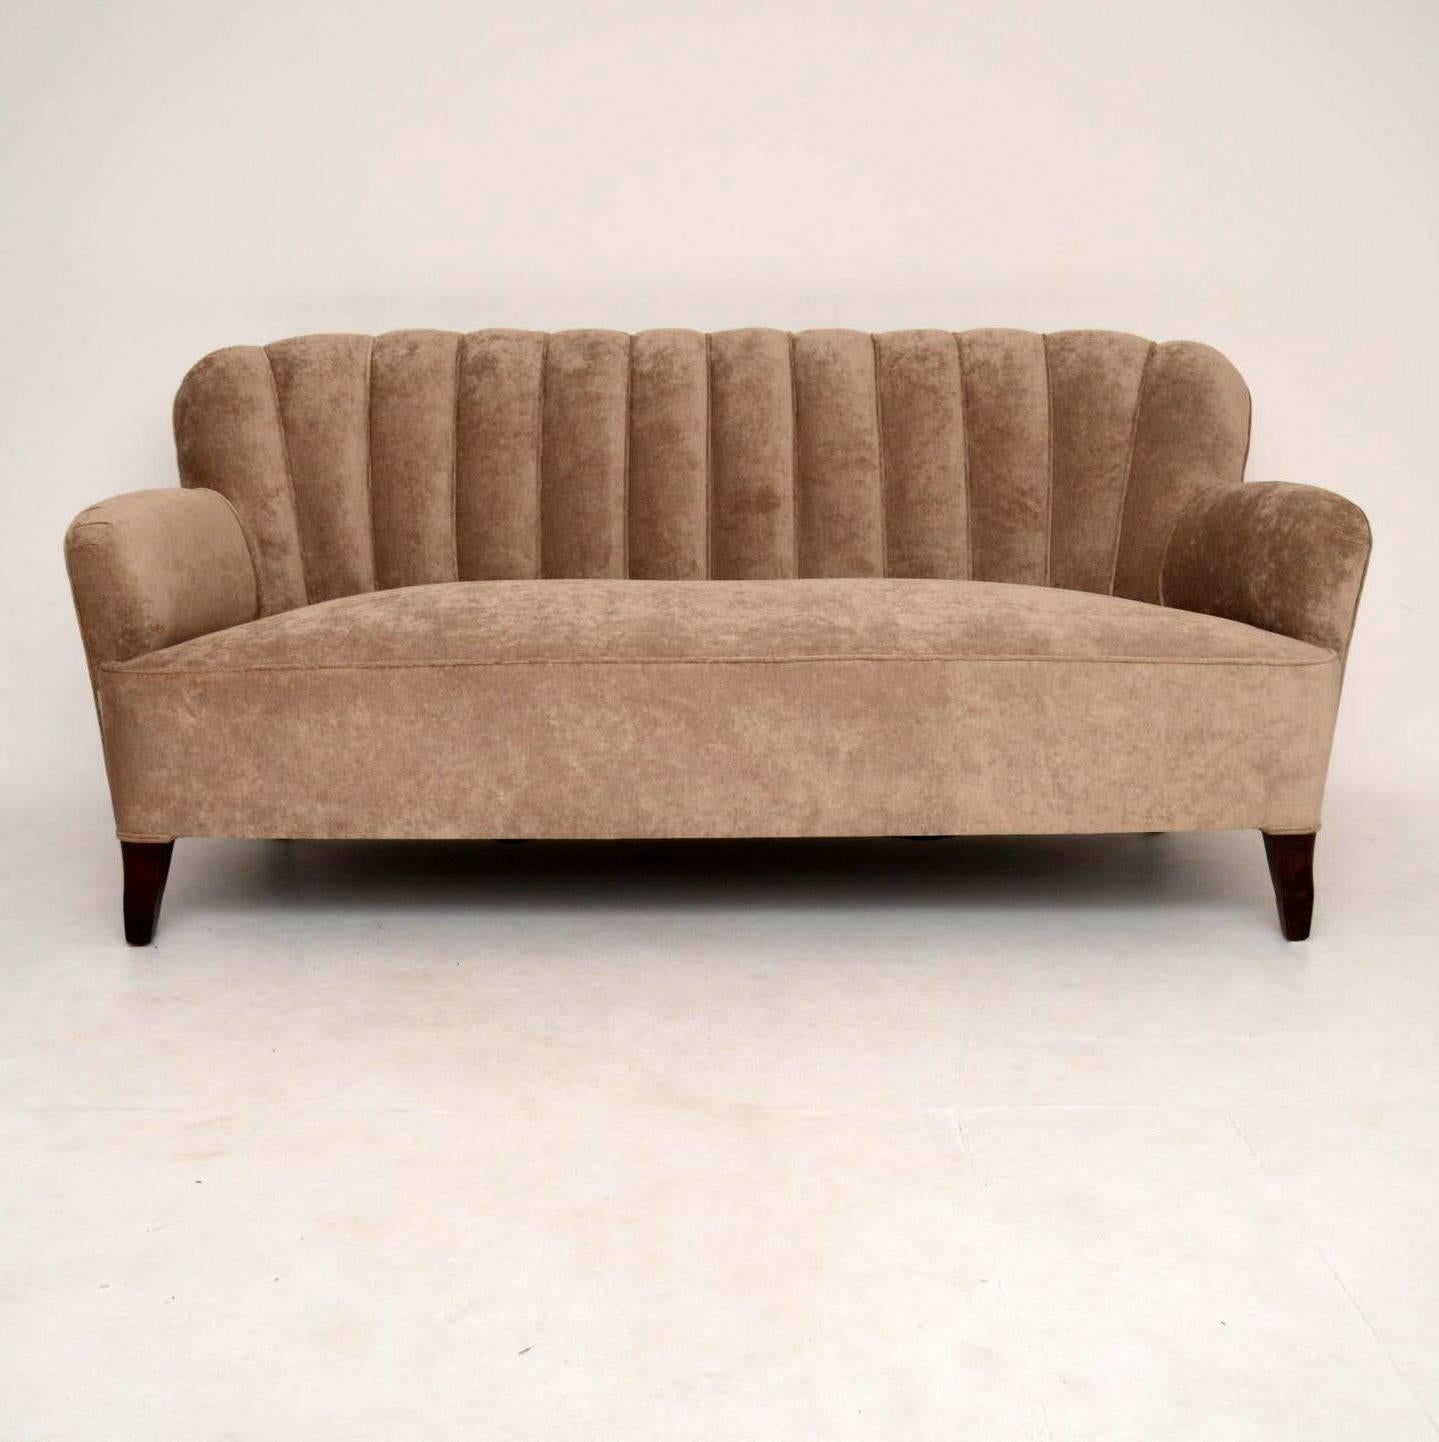 This three-seat fully upholstered 1930s Swedish sofa is very stylish and very comfortable. It comes with a matching pair of armchairs that are also showing in this listing and separately on the web site. Right now I'm selling the suite all together